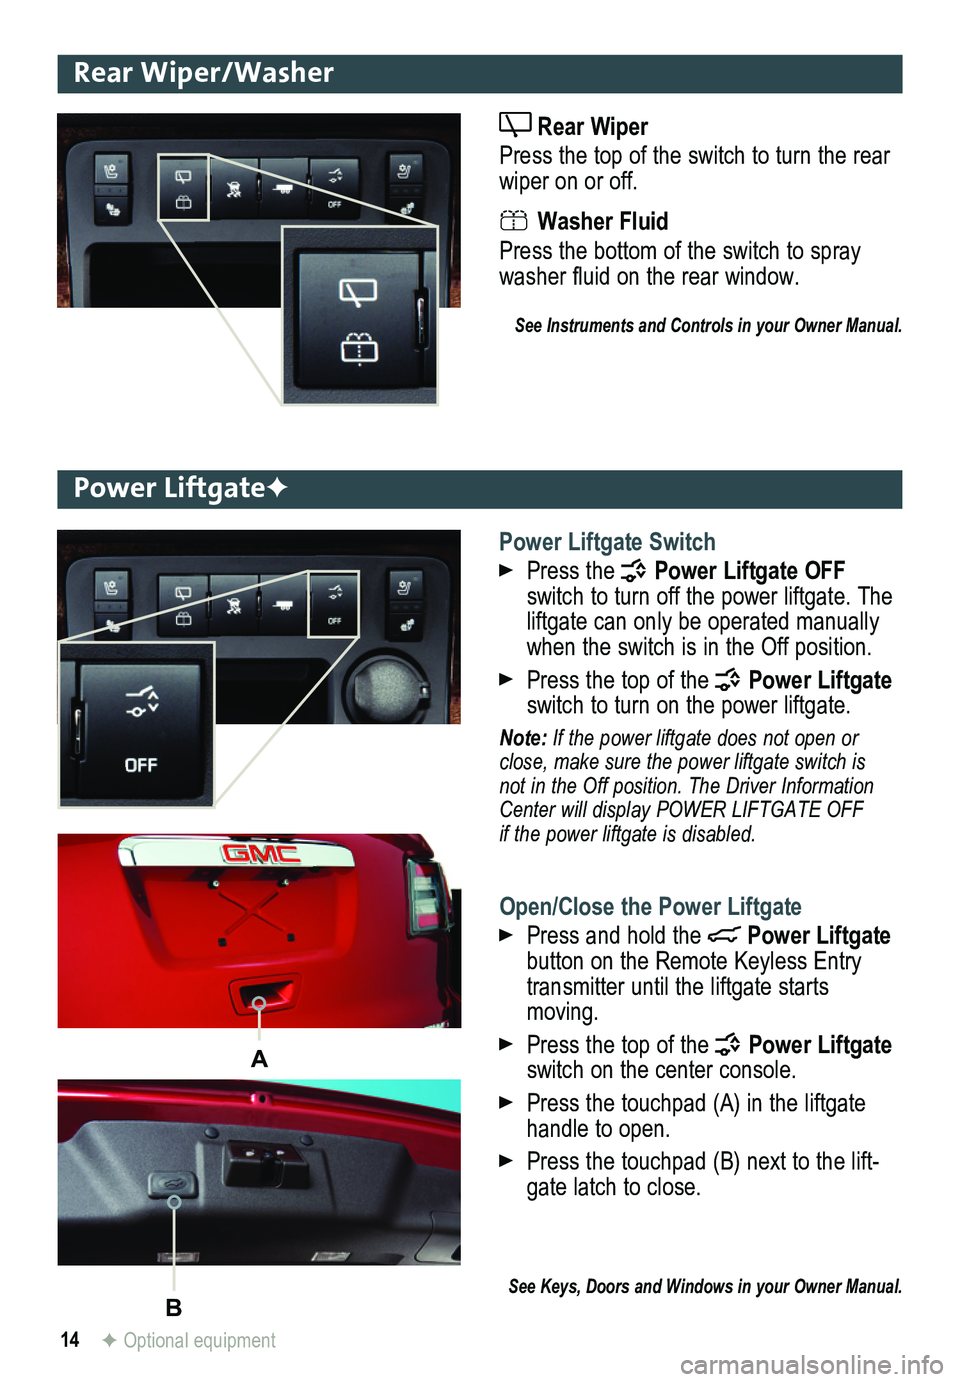 GMC ACADIA 2013  Get To Know Guide 14
Rear Wiper/Washer
 Rear Wiper 
Press the top of the switch to turn the rear wiper on or off.
 Washer Fluid 
Press the bottom of the switch to spray washer fluid on the rear window. 
See Instruments